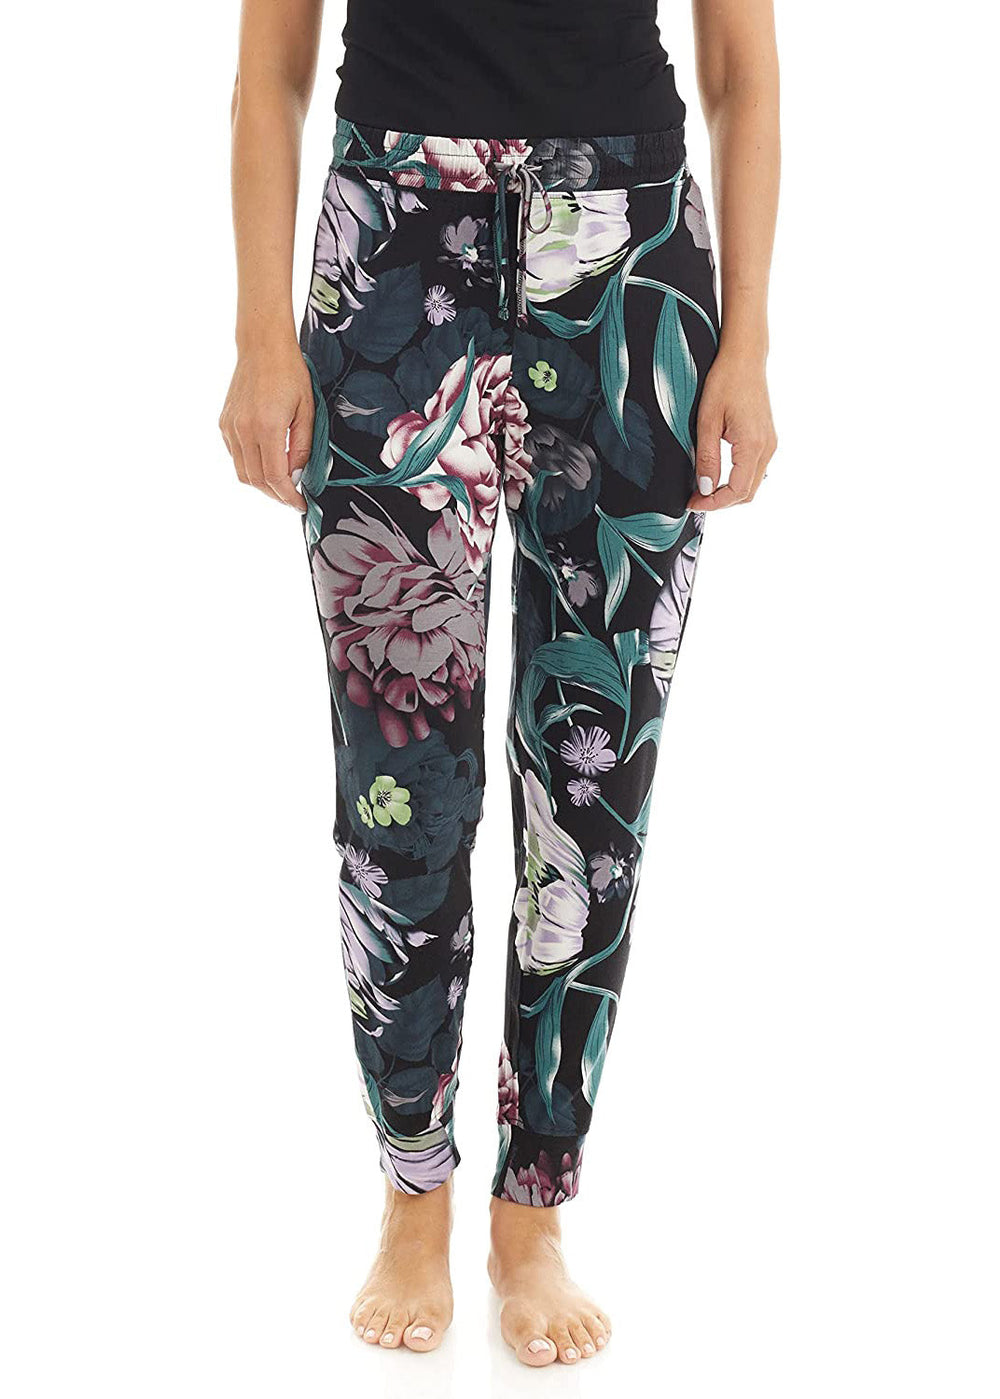 Bamboo wide-leg pyjama bottoms with elastic waistband, drawstring, and open bottom leg. flower pattern, main colors are green, purple, white, red, on black background